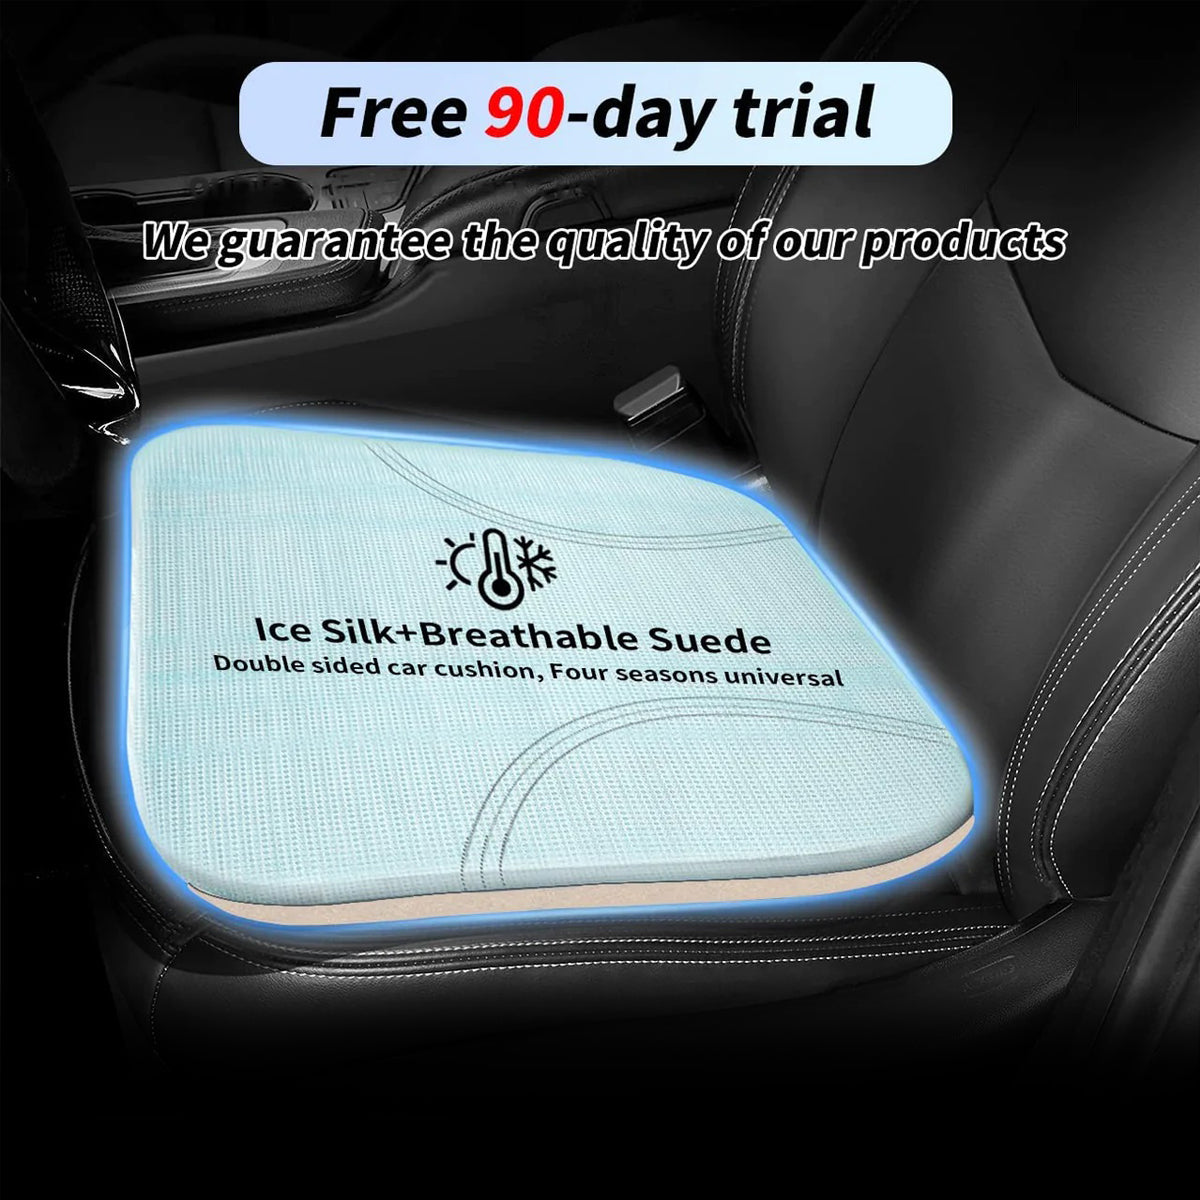 Car Seat Cushion, Custom Fit For Your Cars, Car Memory Foam Seat Cushion, Heightening Seat Cushion, Seat Cushion for Car and Office Chair UE19999